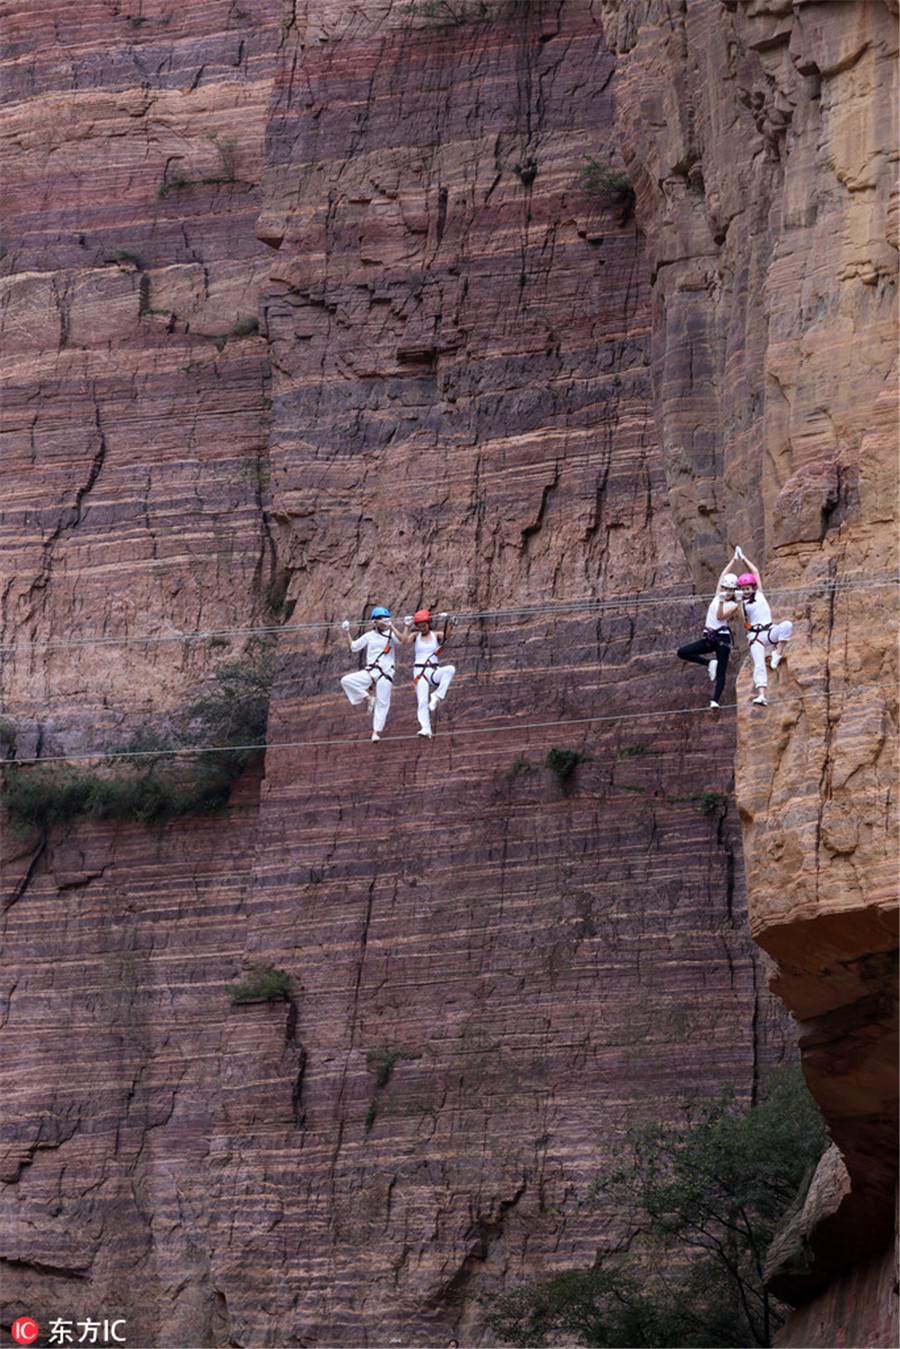 High on mountain: Yoga enthusiasts practice on cliff